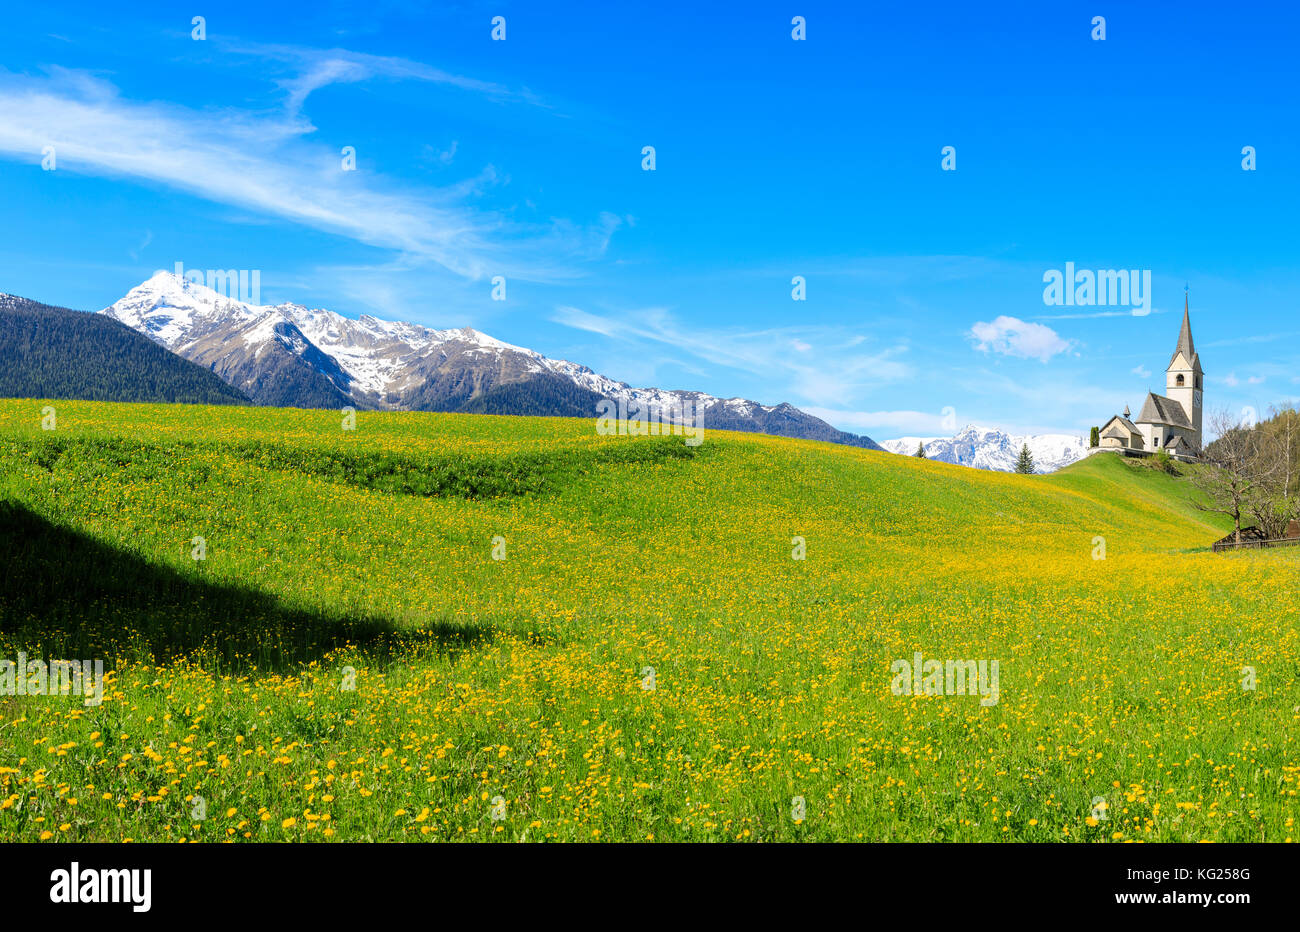 Panoramic of valley covered with yellow flowers, Schmitten, District of Albula, Canton of Graubunden, Switzerland, Europe Stock Photo